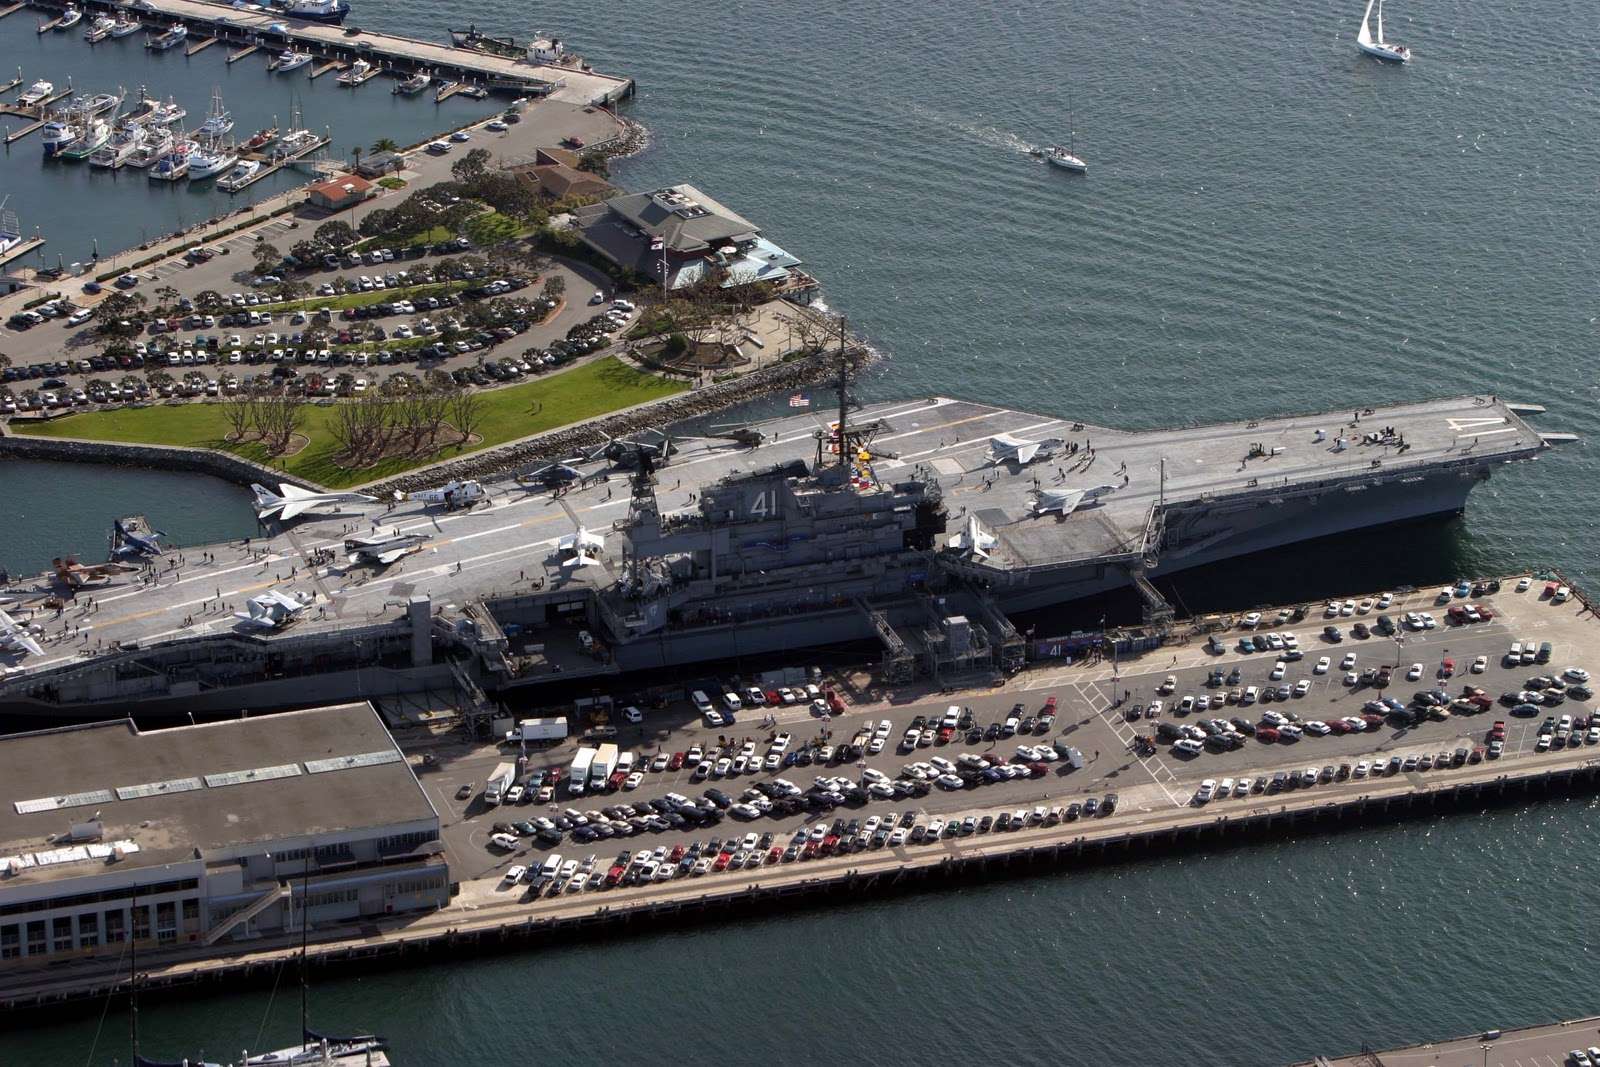 CAMP HOST Jobs: USS Midway Museum